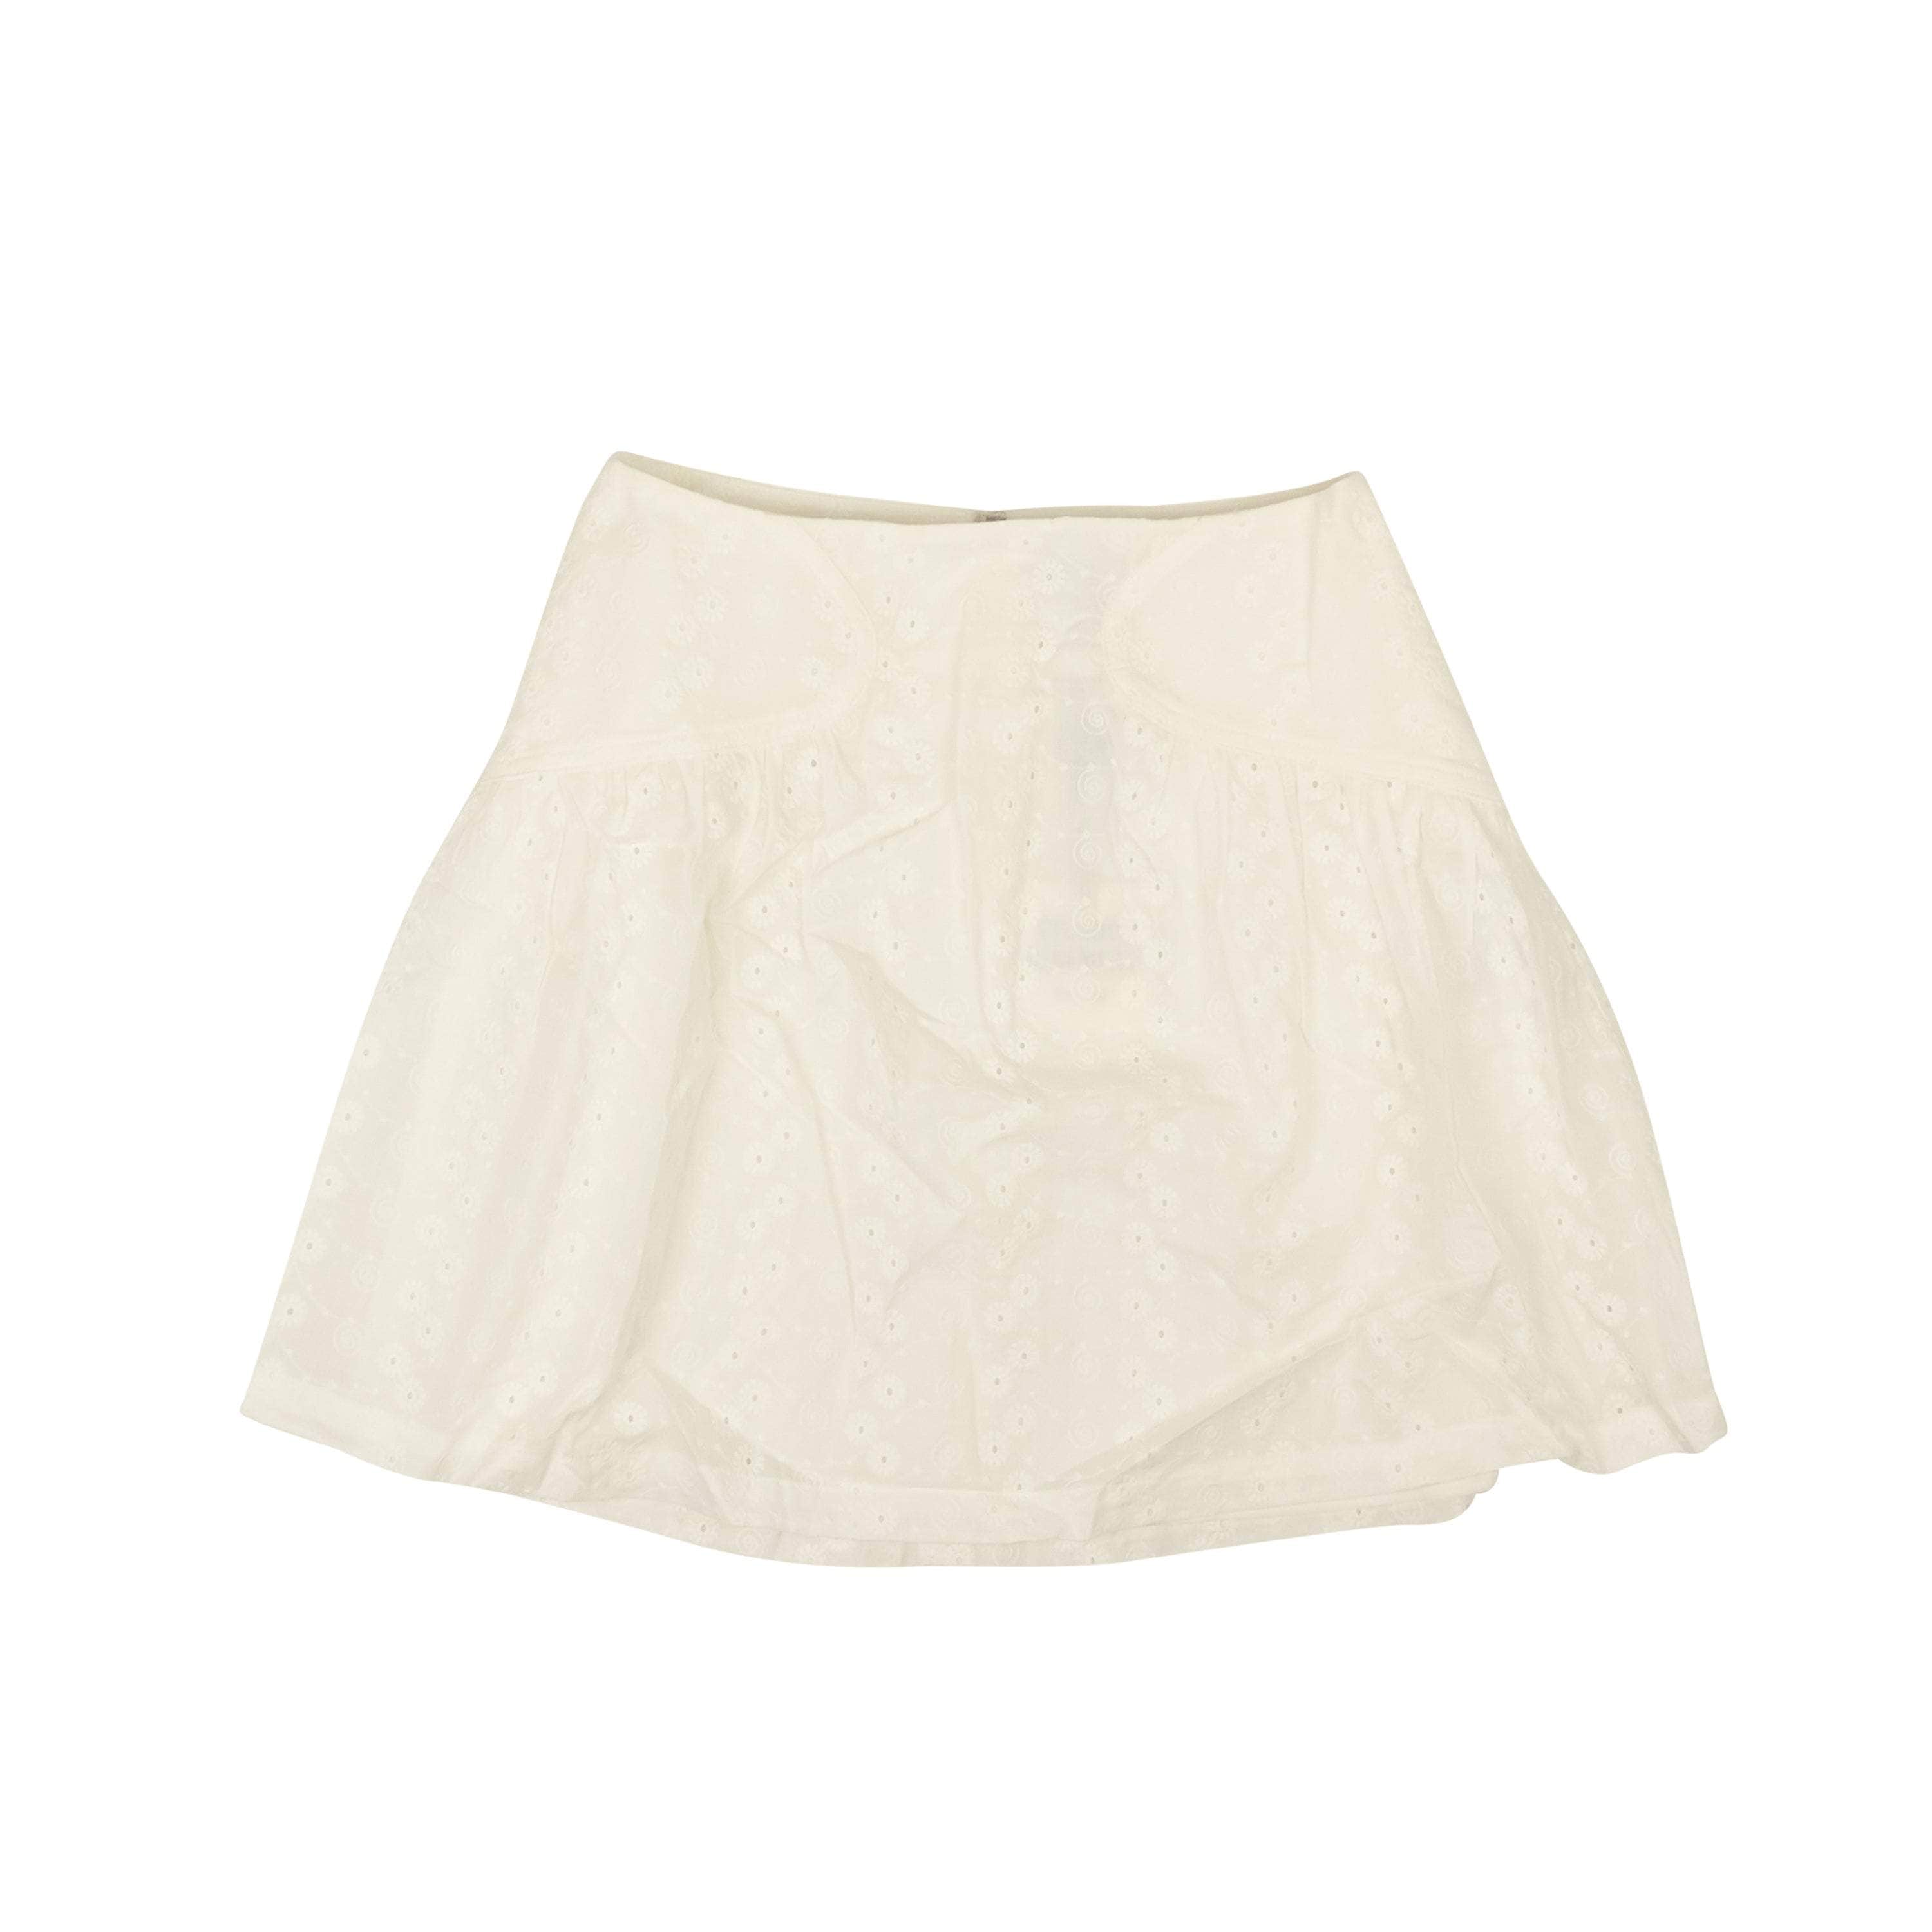 Opening Ceremony channelenable-all, chicmi, couponcollection, gender-womens, main-clothing, opening-ceremony, size-0, under-250, womens-flared-skirts Optic White Cotton Eyelet Mini Skirt